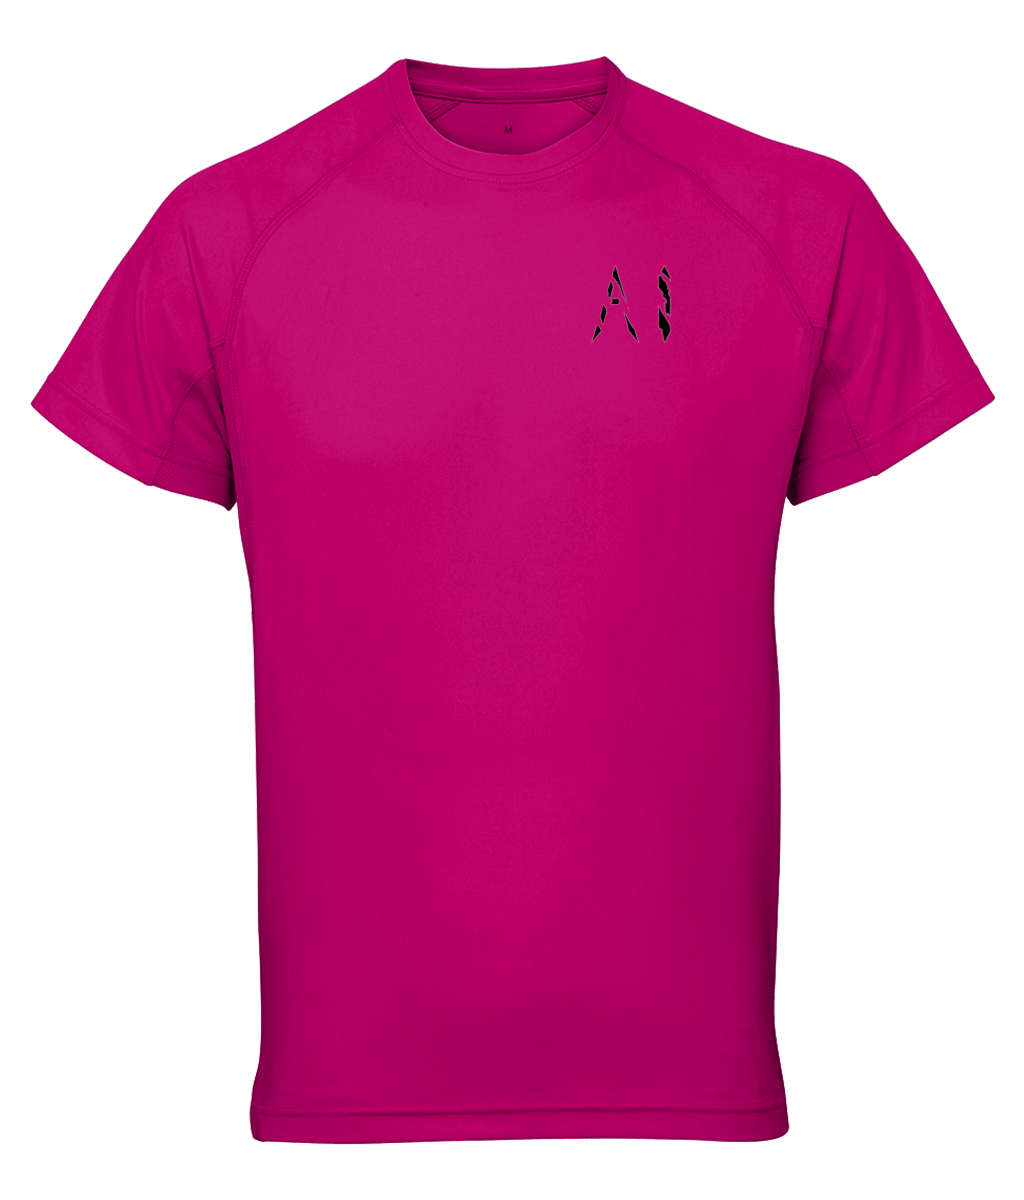 Womens Dark purple Athletic Performance Top with black AI logo on left breast